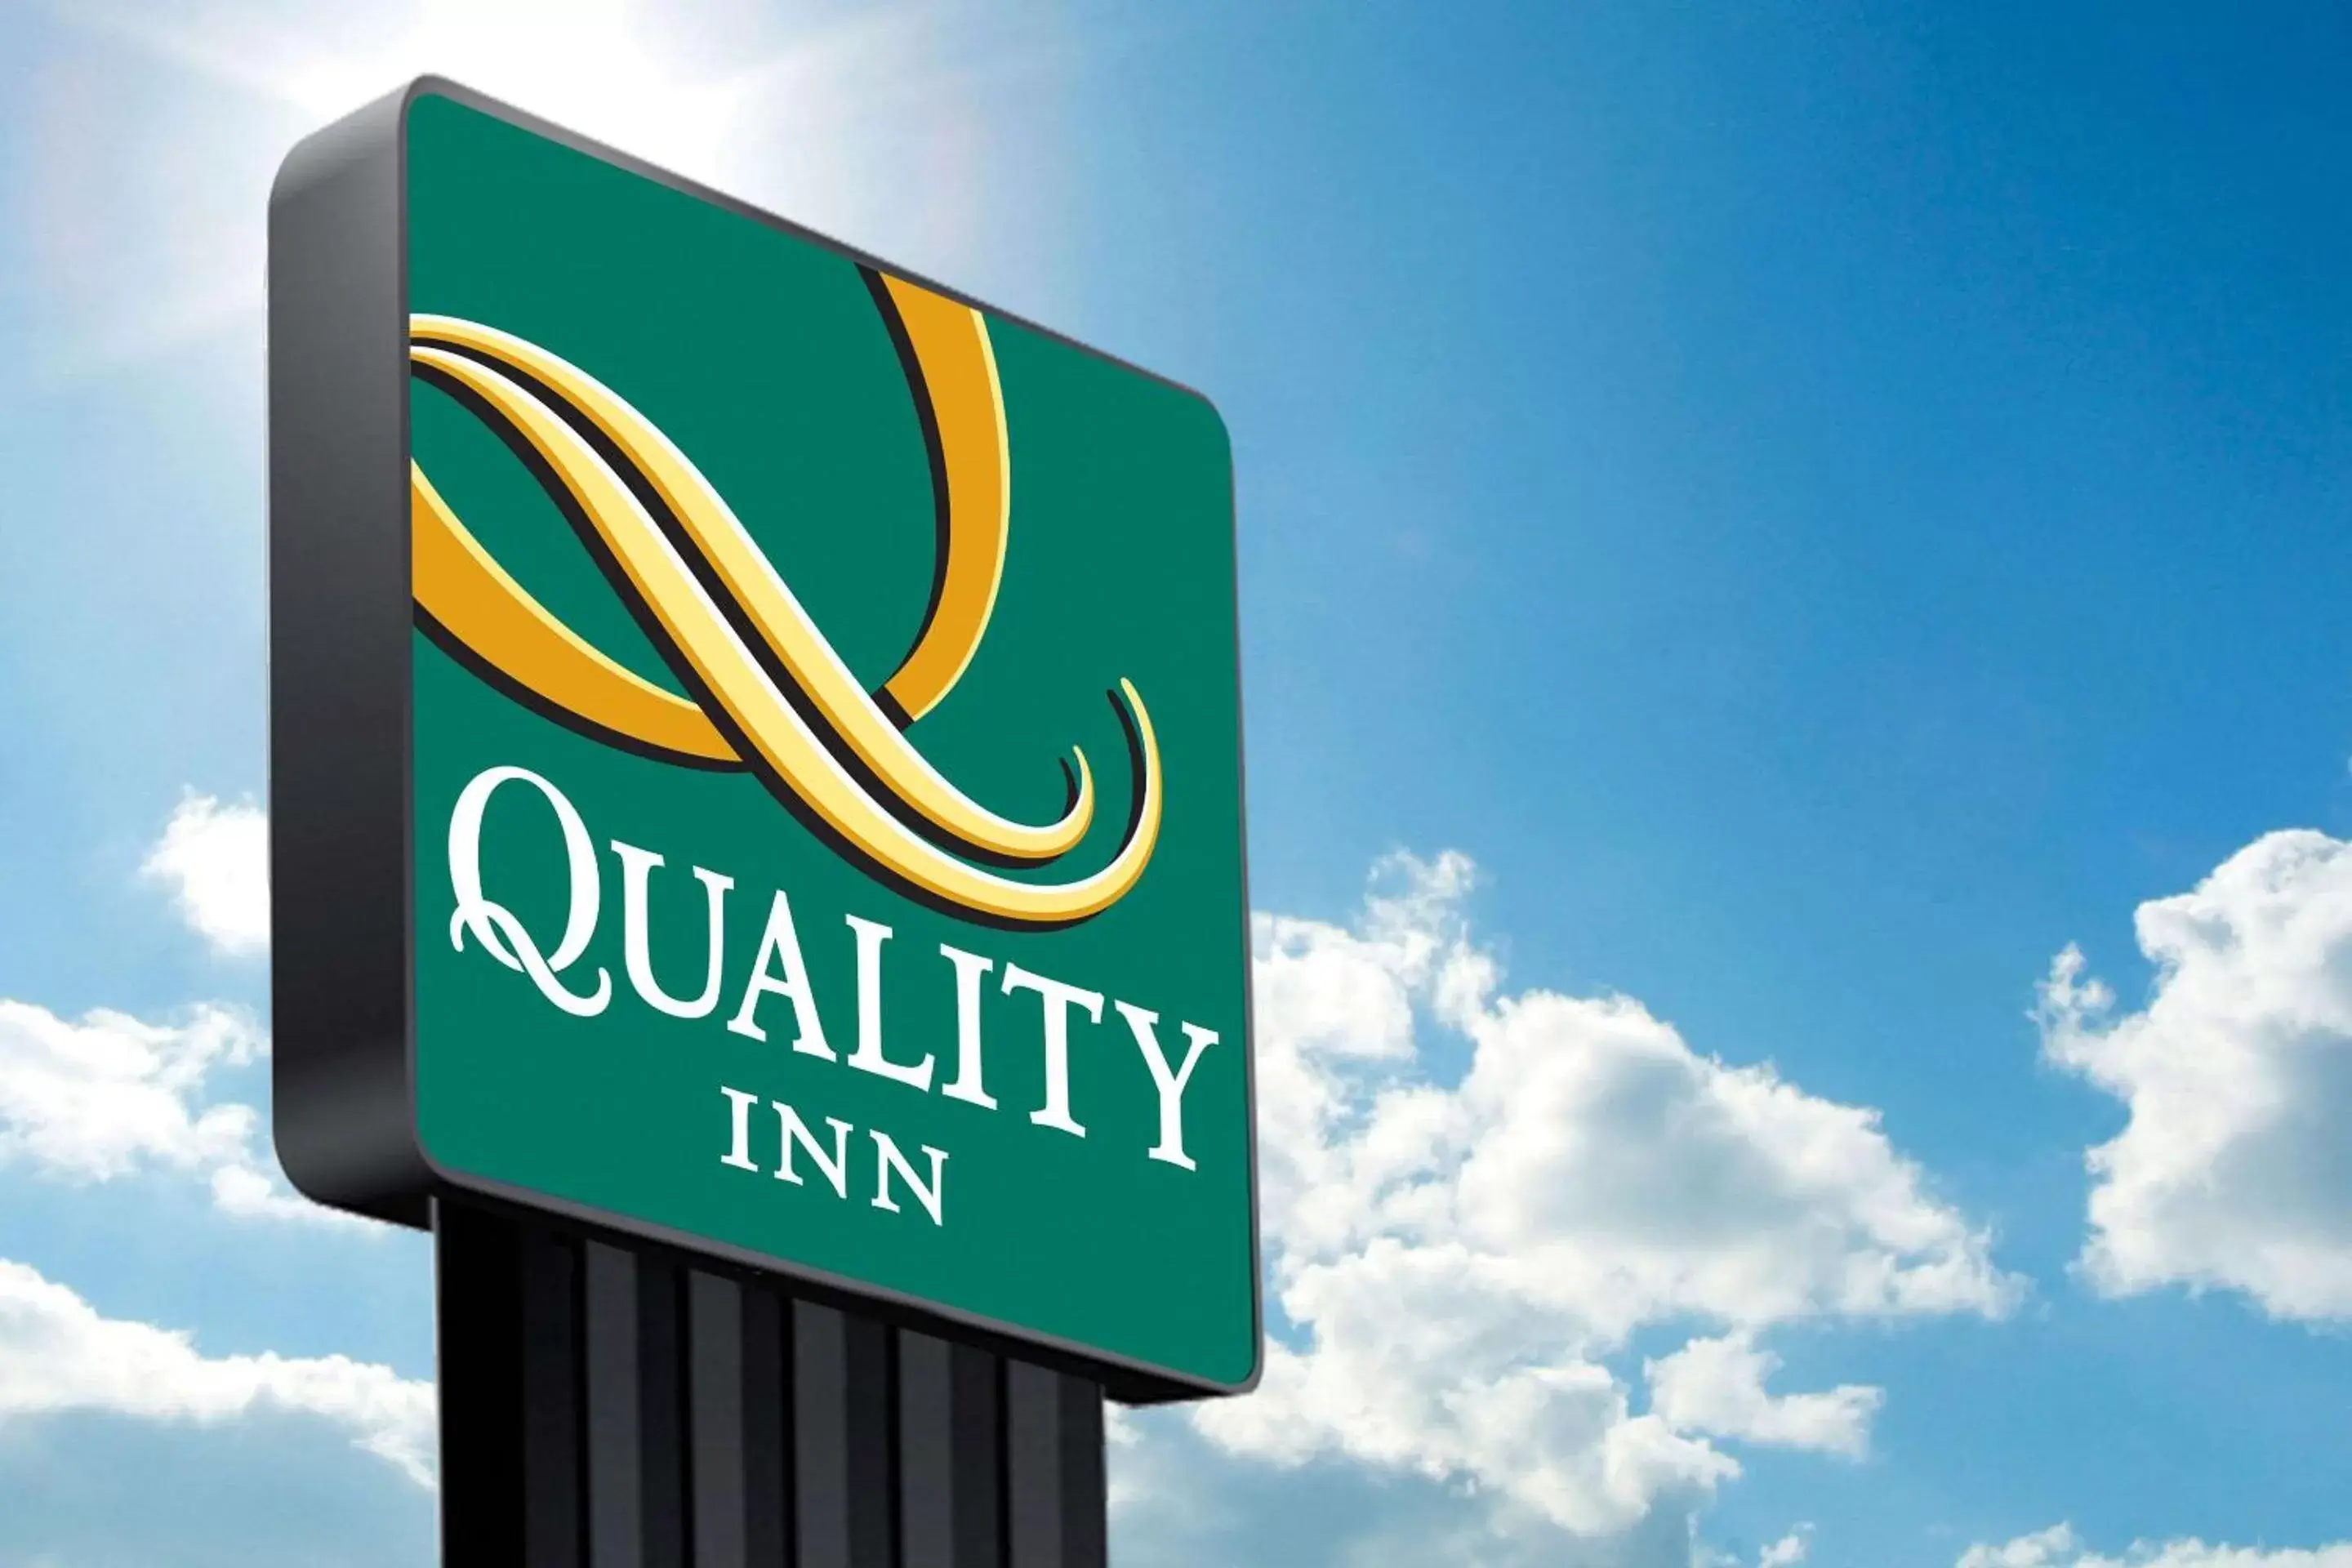 Property building in Quality Inn